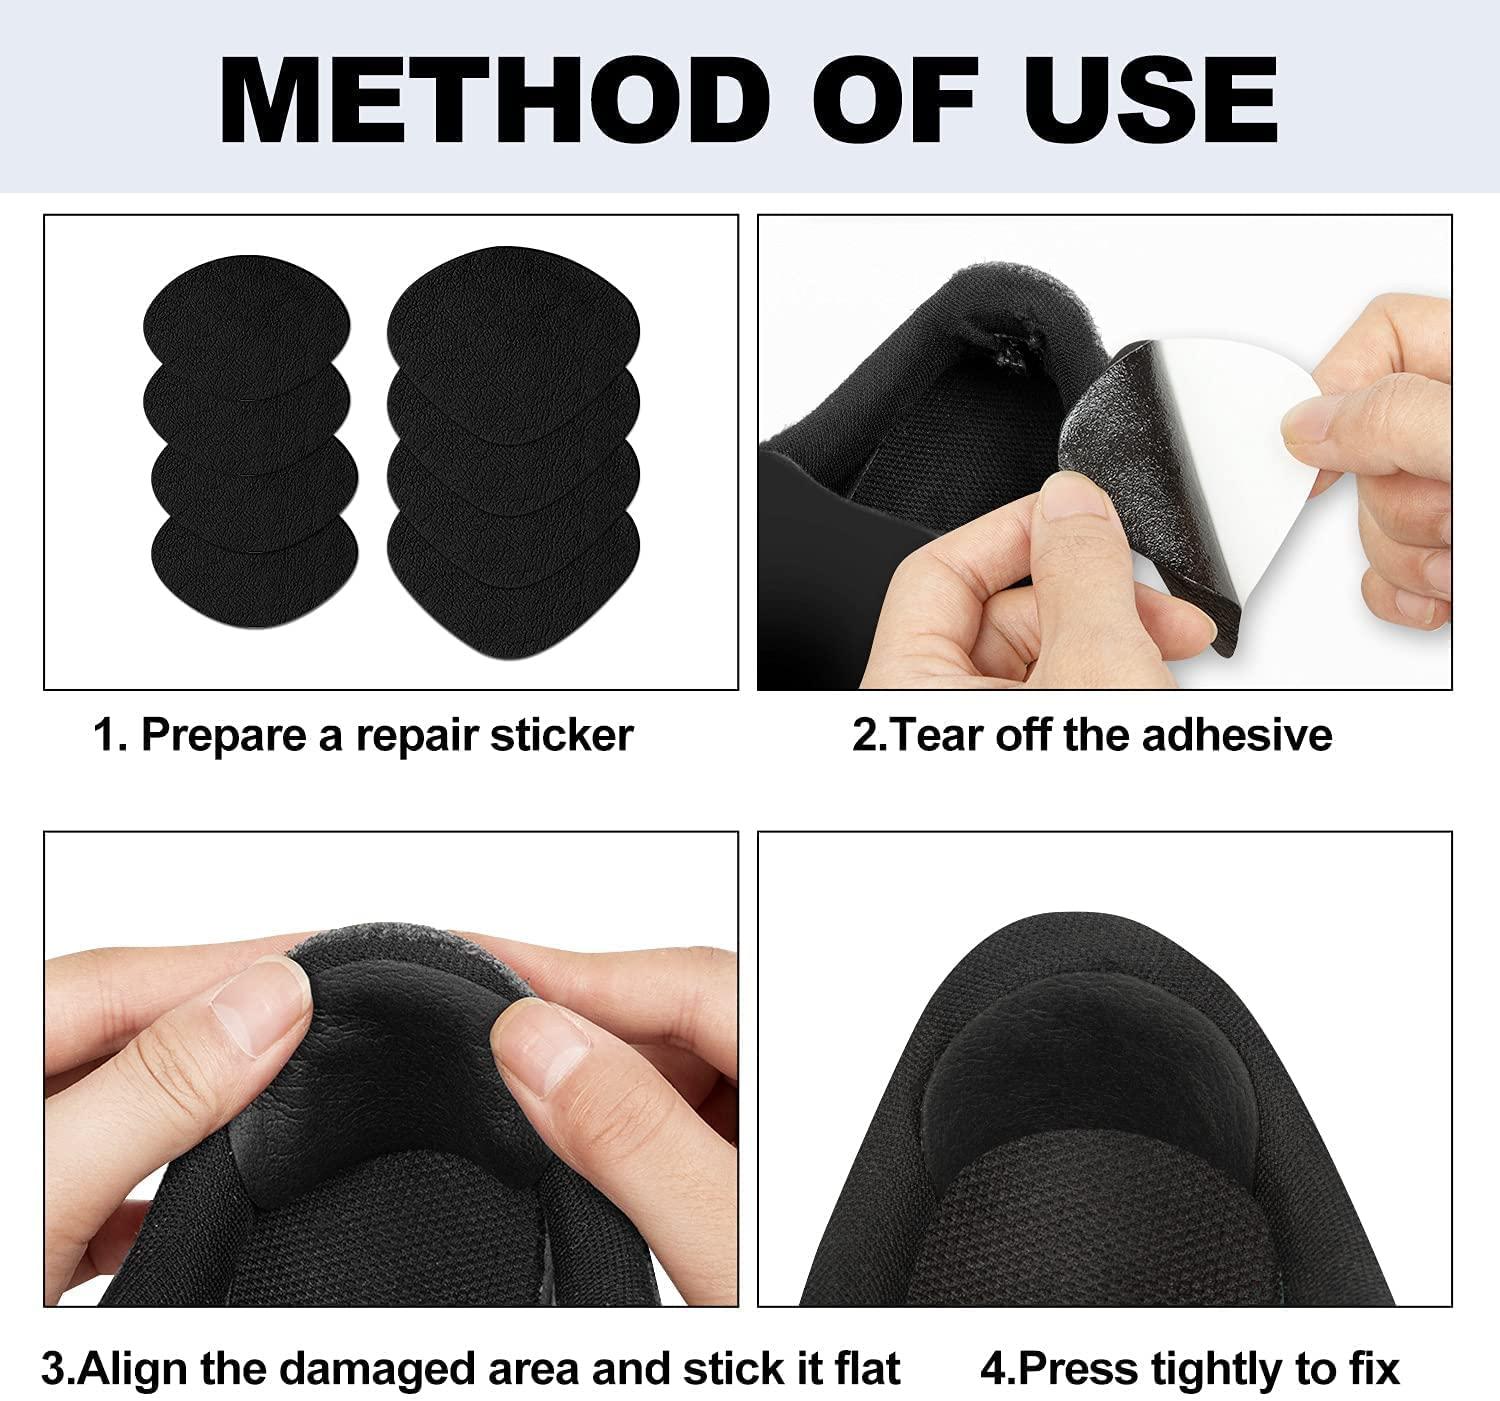 Shoe Heel Repair, 4 Pairs Self-Adhesive Inside Shoe Patches for Holes, Shoe Hole Repair Patch Kit for Sneaker, Leather Shoes, High Heels